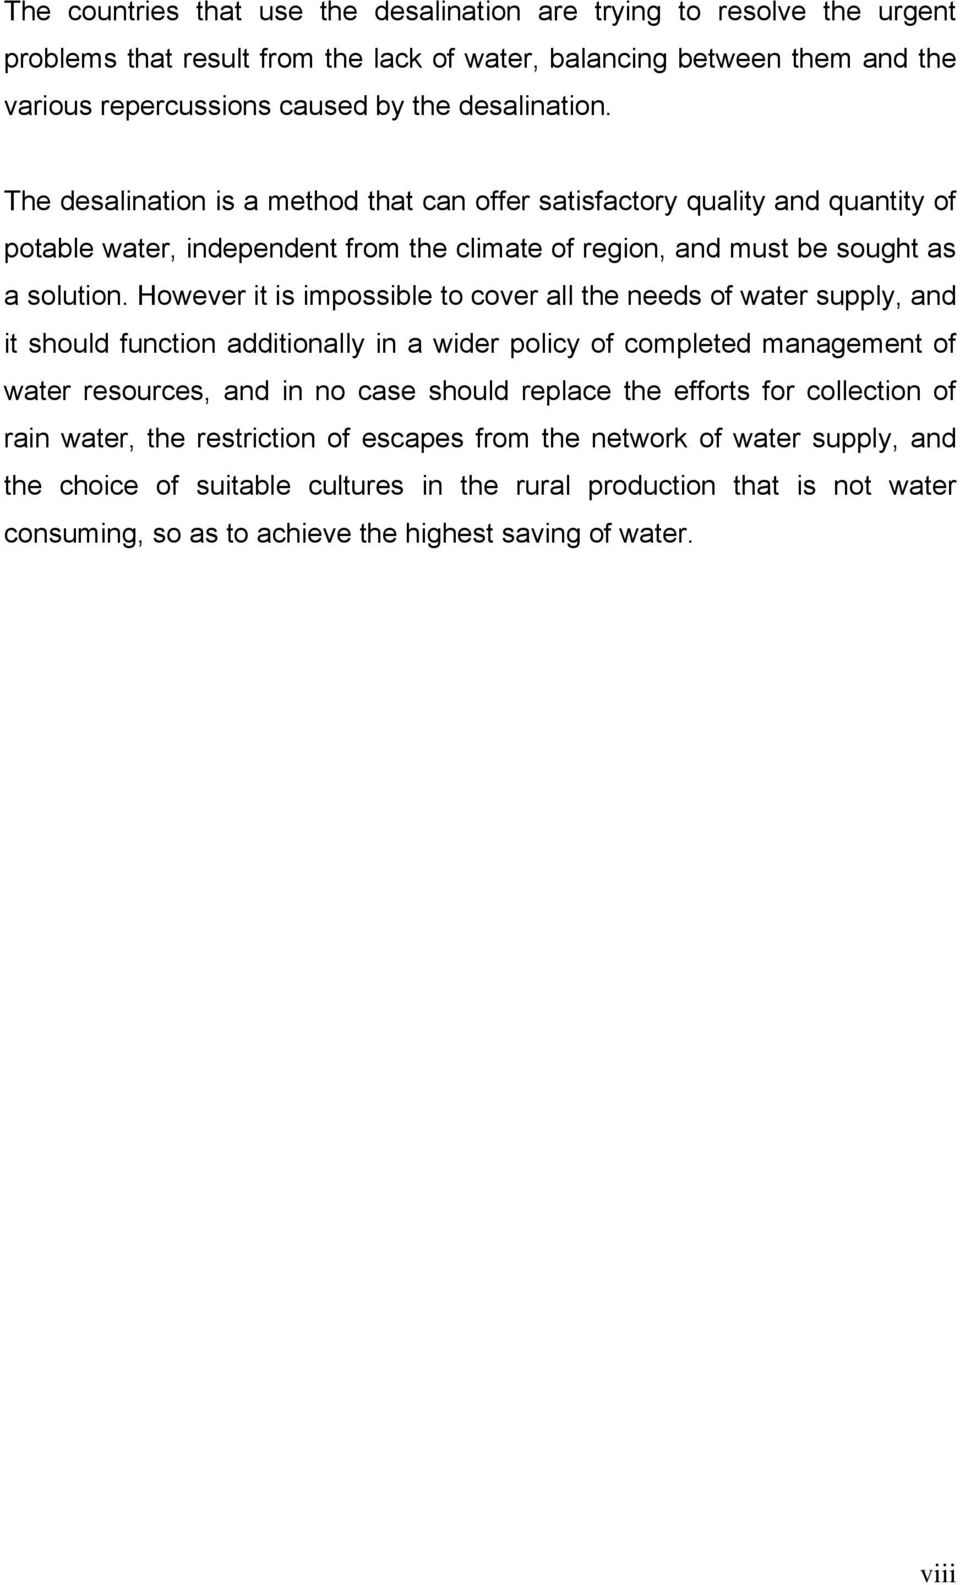 However it is impossible to cover all the needs of water supply, and it should function additionally in a wider policy of completed management of water resources, and in no case should replace the